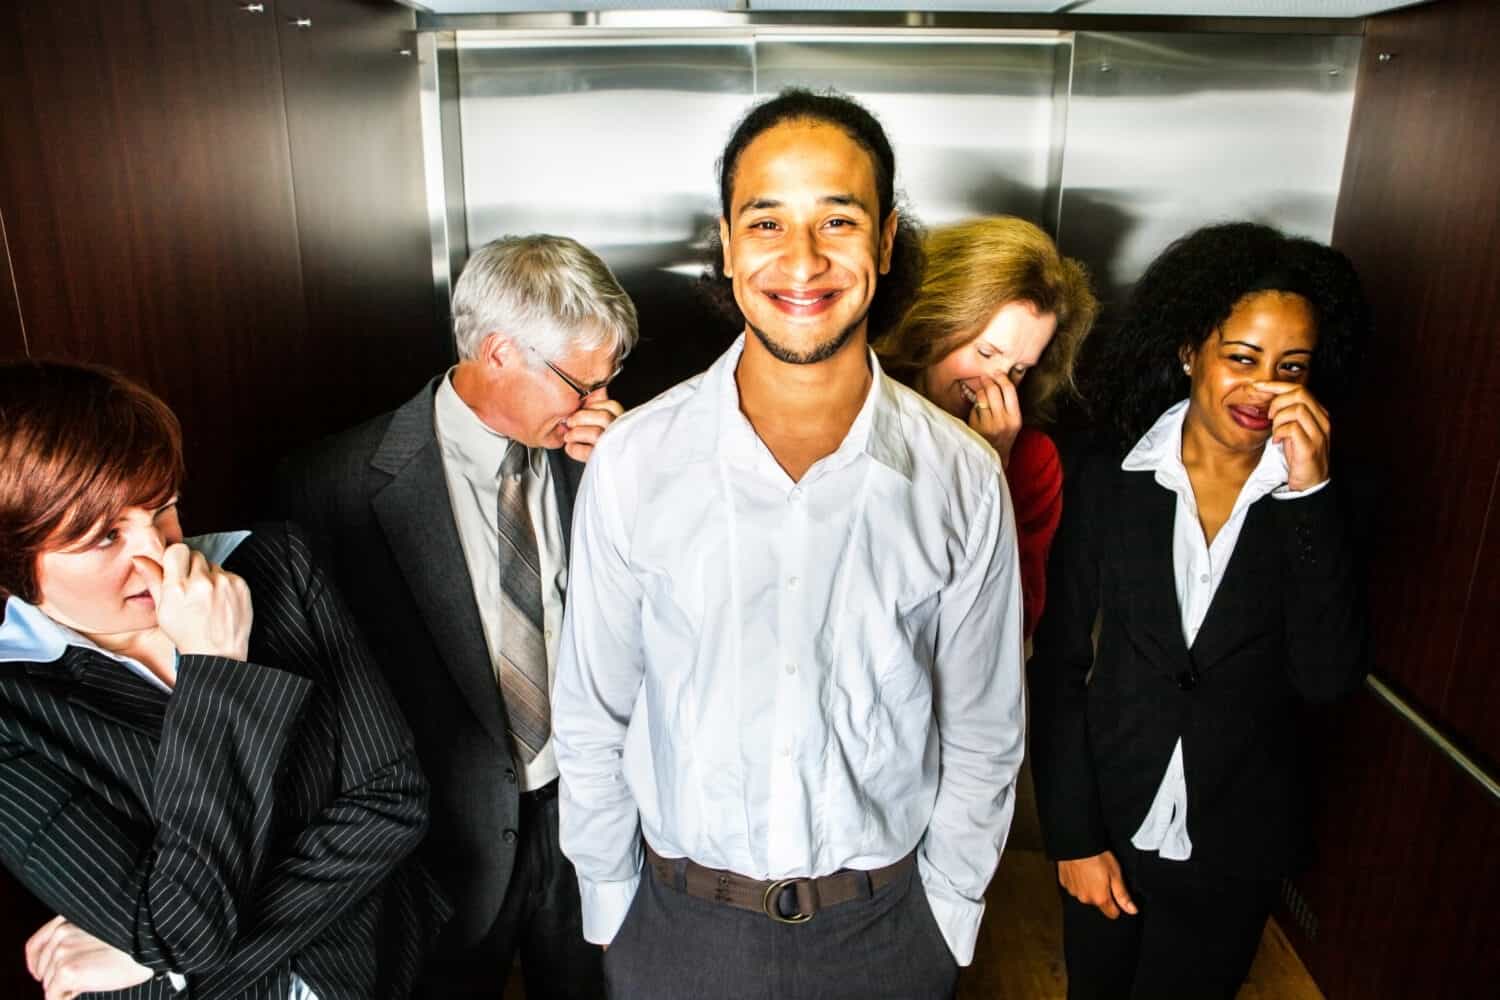 A young man smiles in embarrassment in an elevator while people hold their noses.